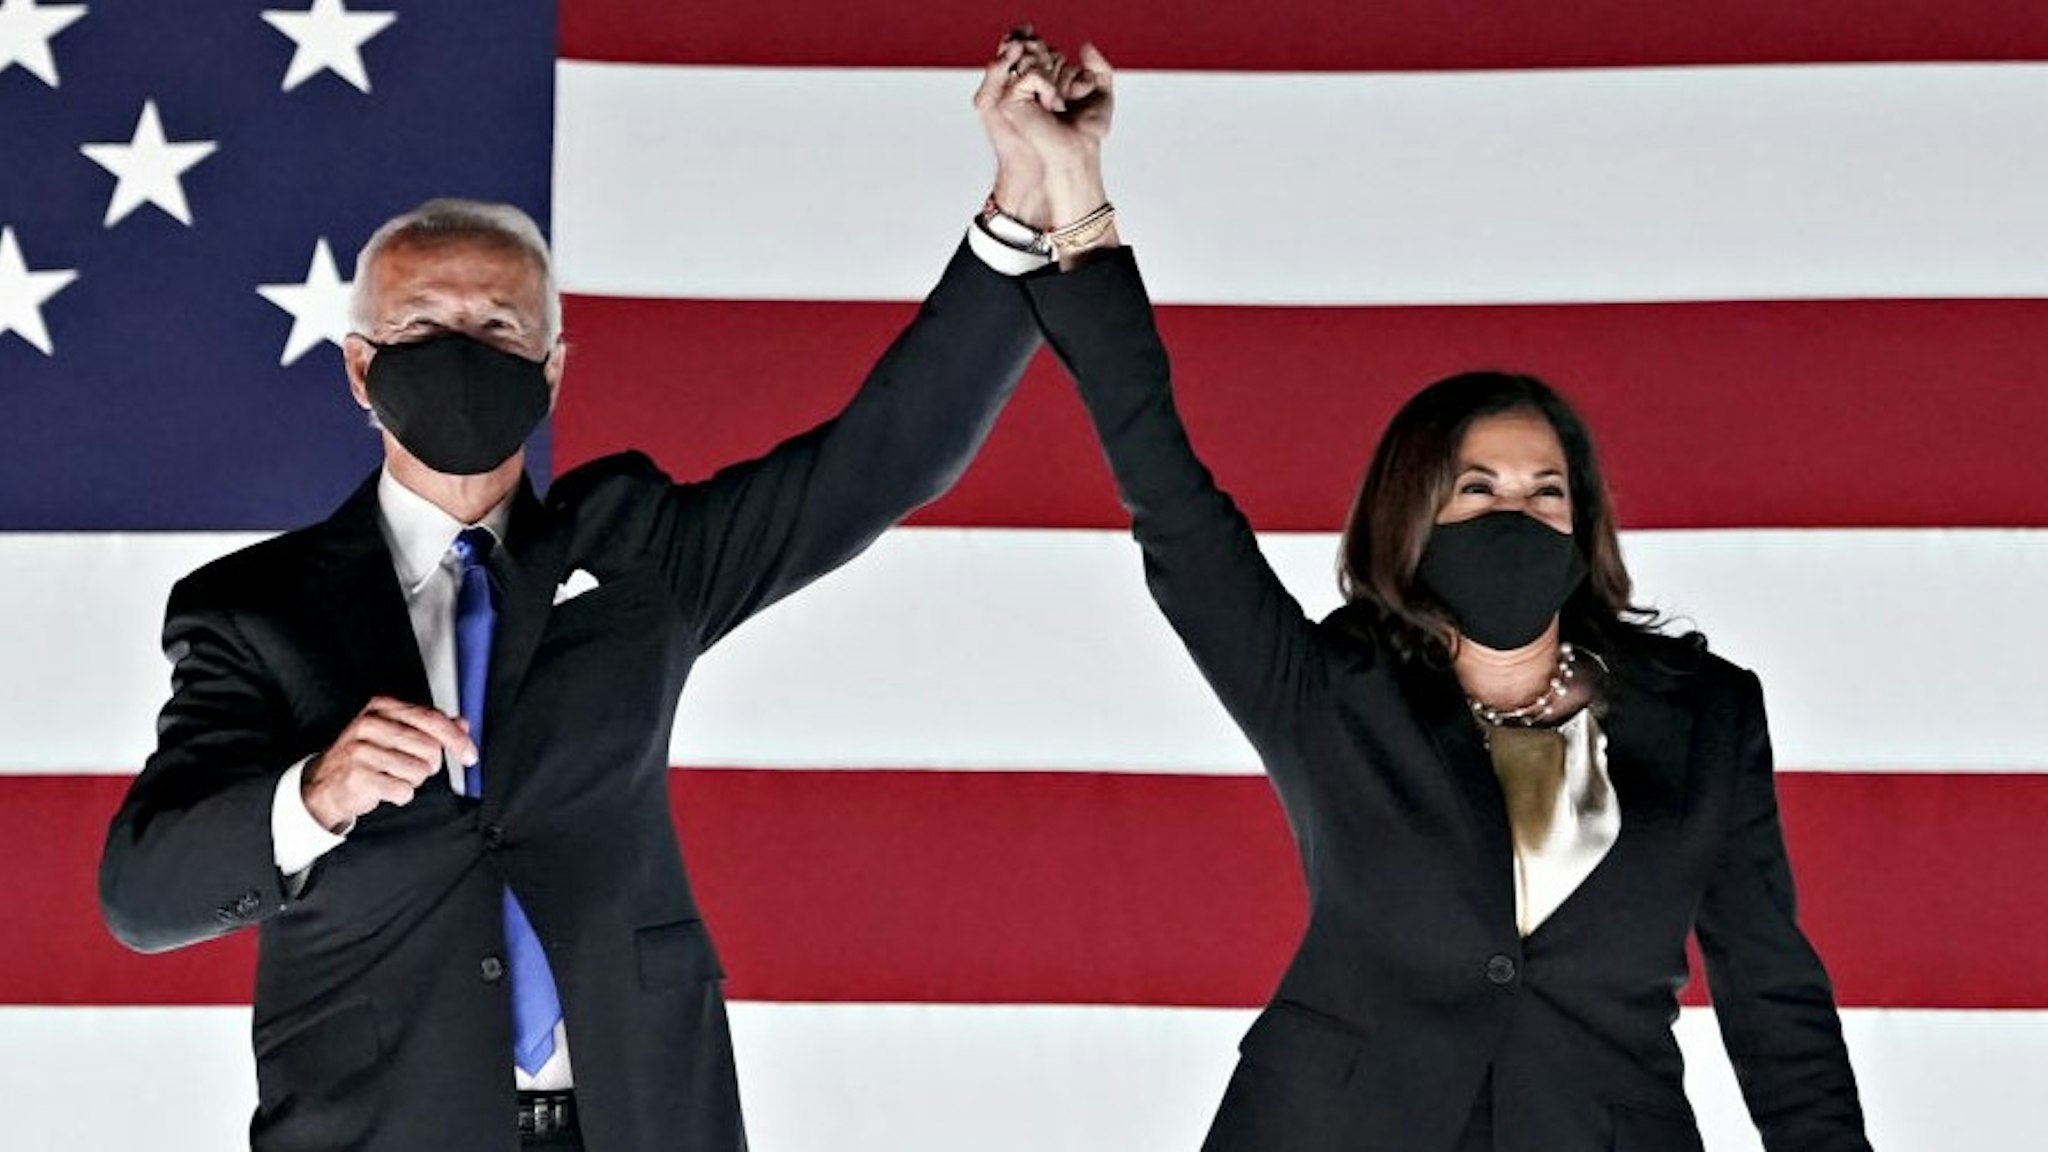 Former Vice President Joe Biden, Democratic presidential nominee, left, and Senator Kamala Harris, Democratic vice presidential nominee, wear protective masks while holding hands outside the Chase Center during the Democratic National Convention in Wilmington, Delaware, U.S., on Thursday, Aug. 20, 2020. Biden accepted the Democratic nomination to challenge President Donald Trump, urging Americans in a prime-time address to vote for new national leadership that will overcome deep U.S. political divisions. Photographer: